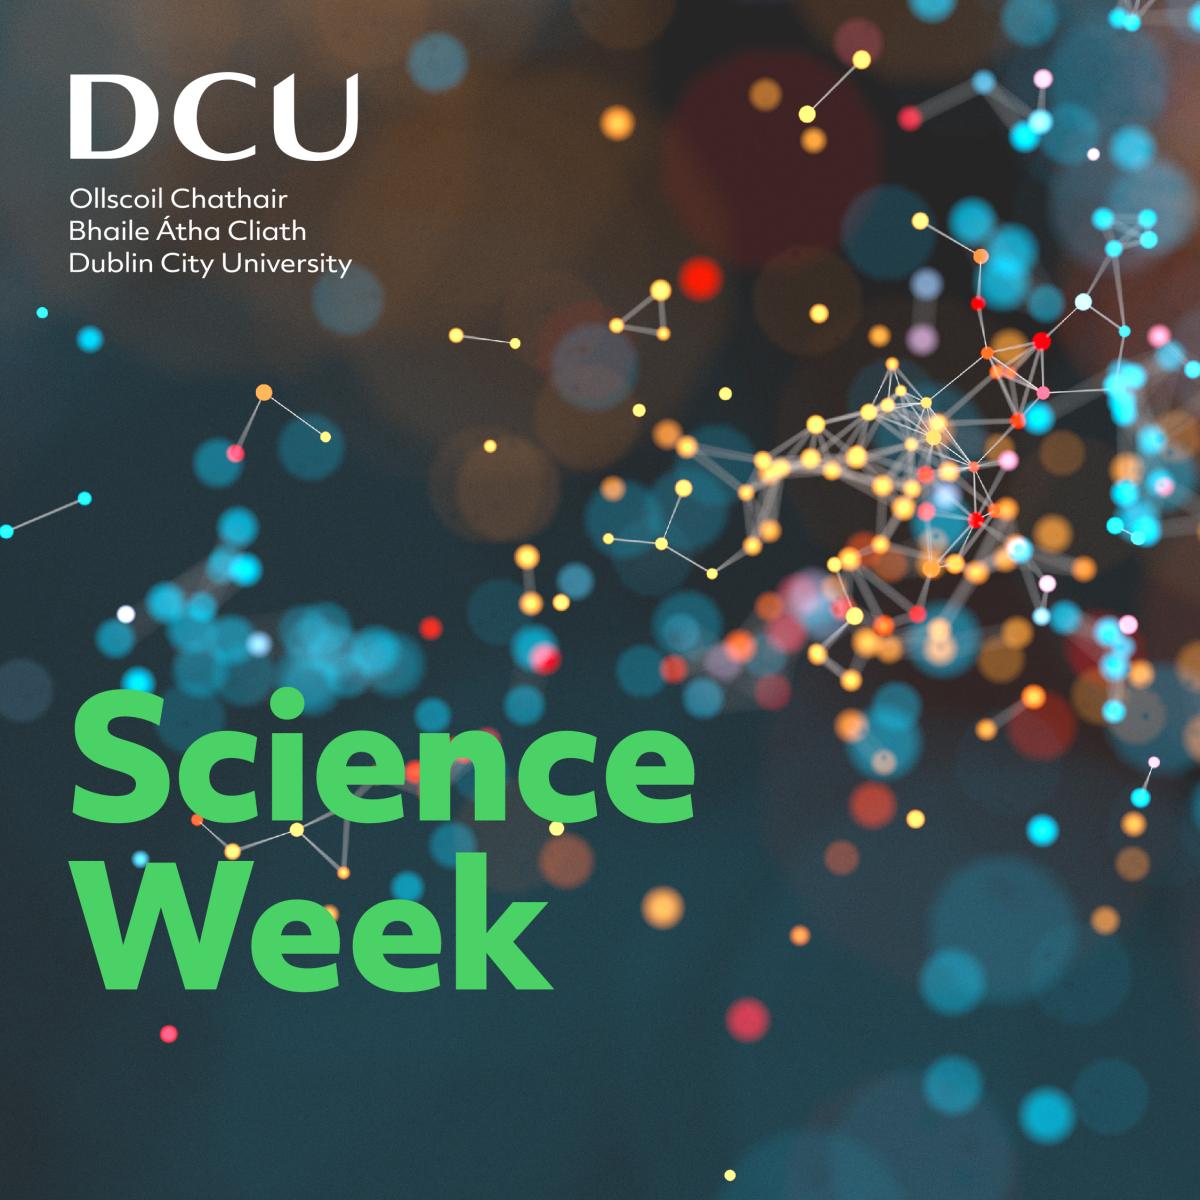 Science Week at the School of Psychology